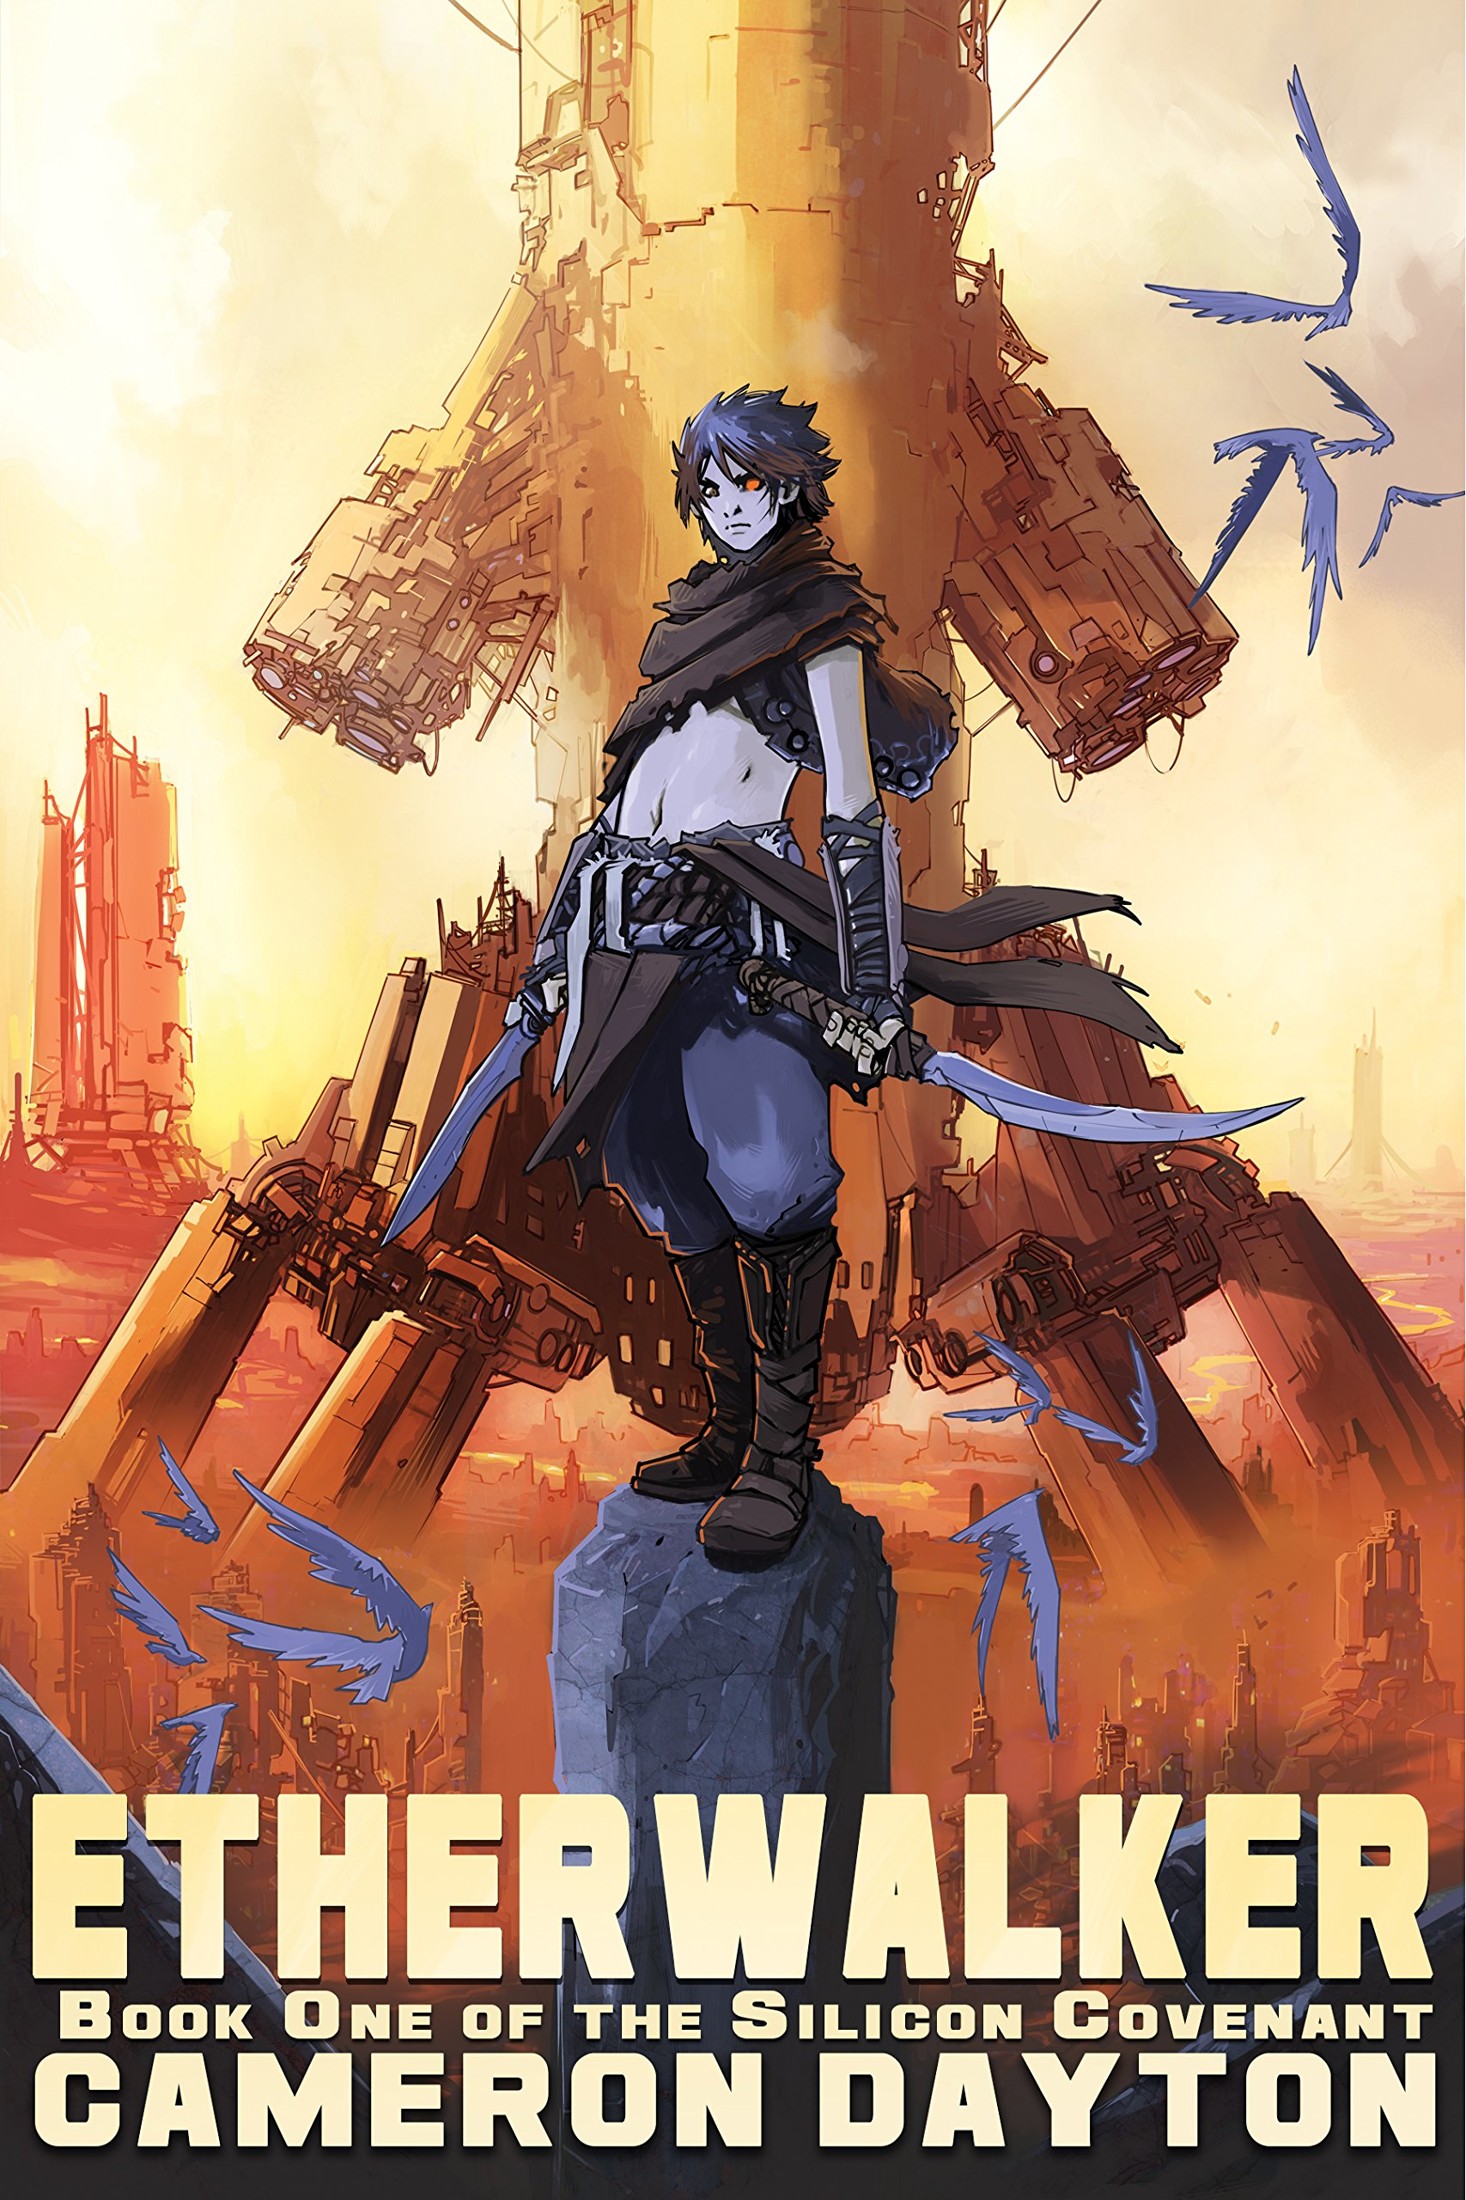 Etherwalker (The Silicon Covenant Book 1)